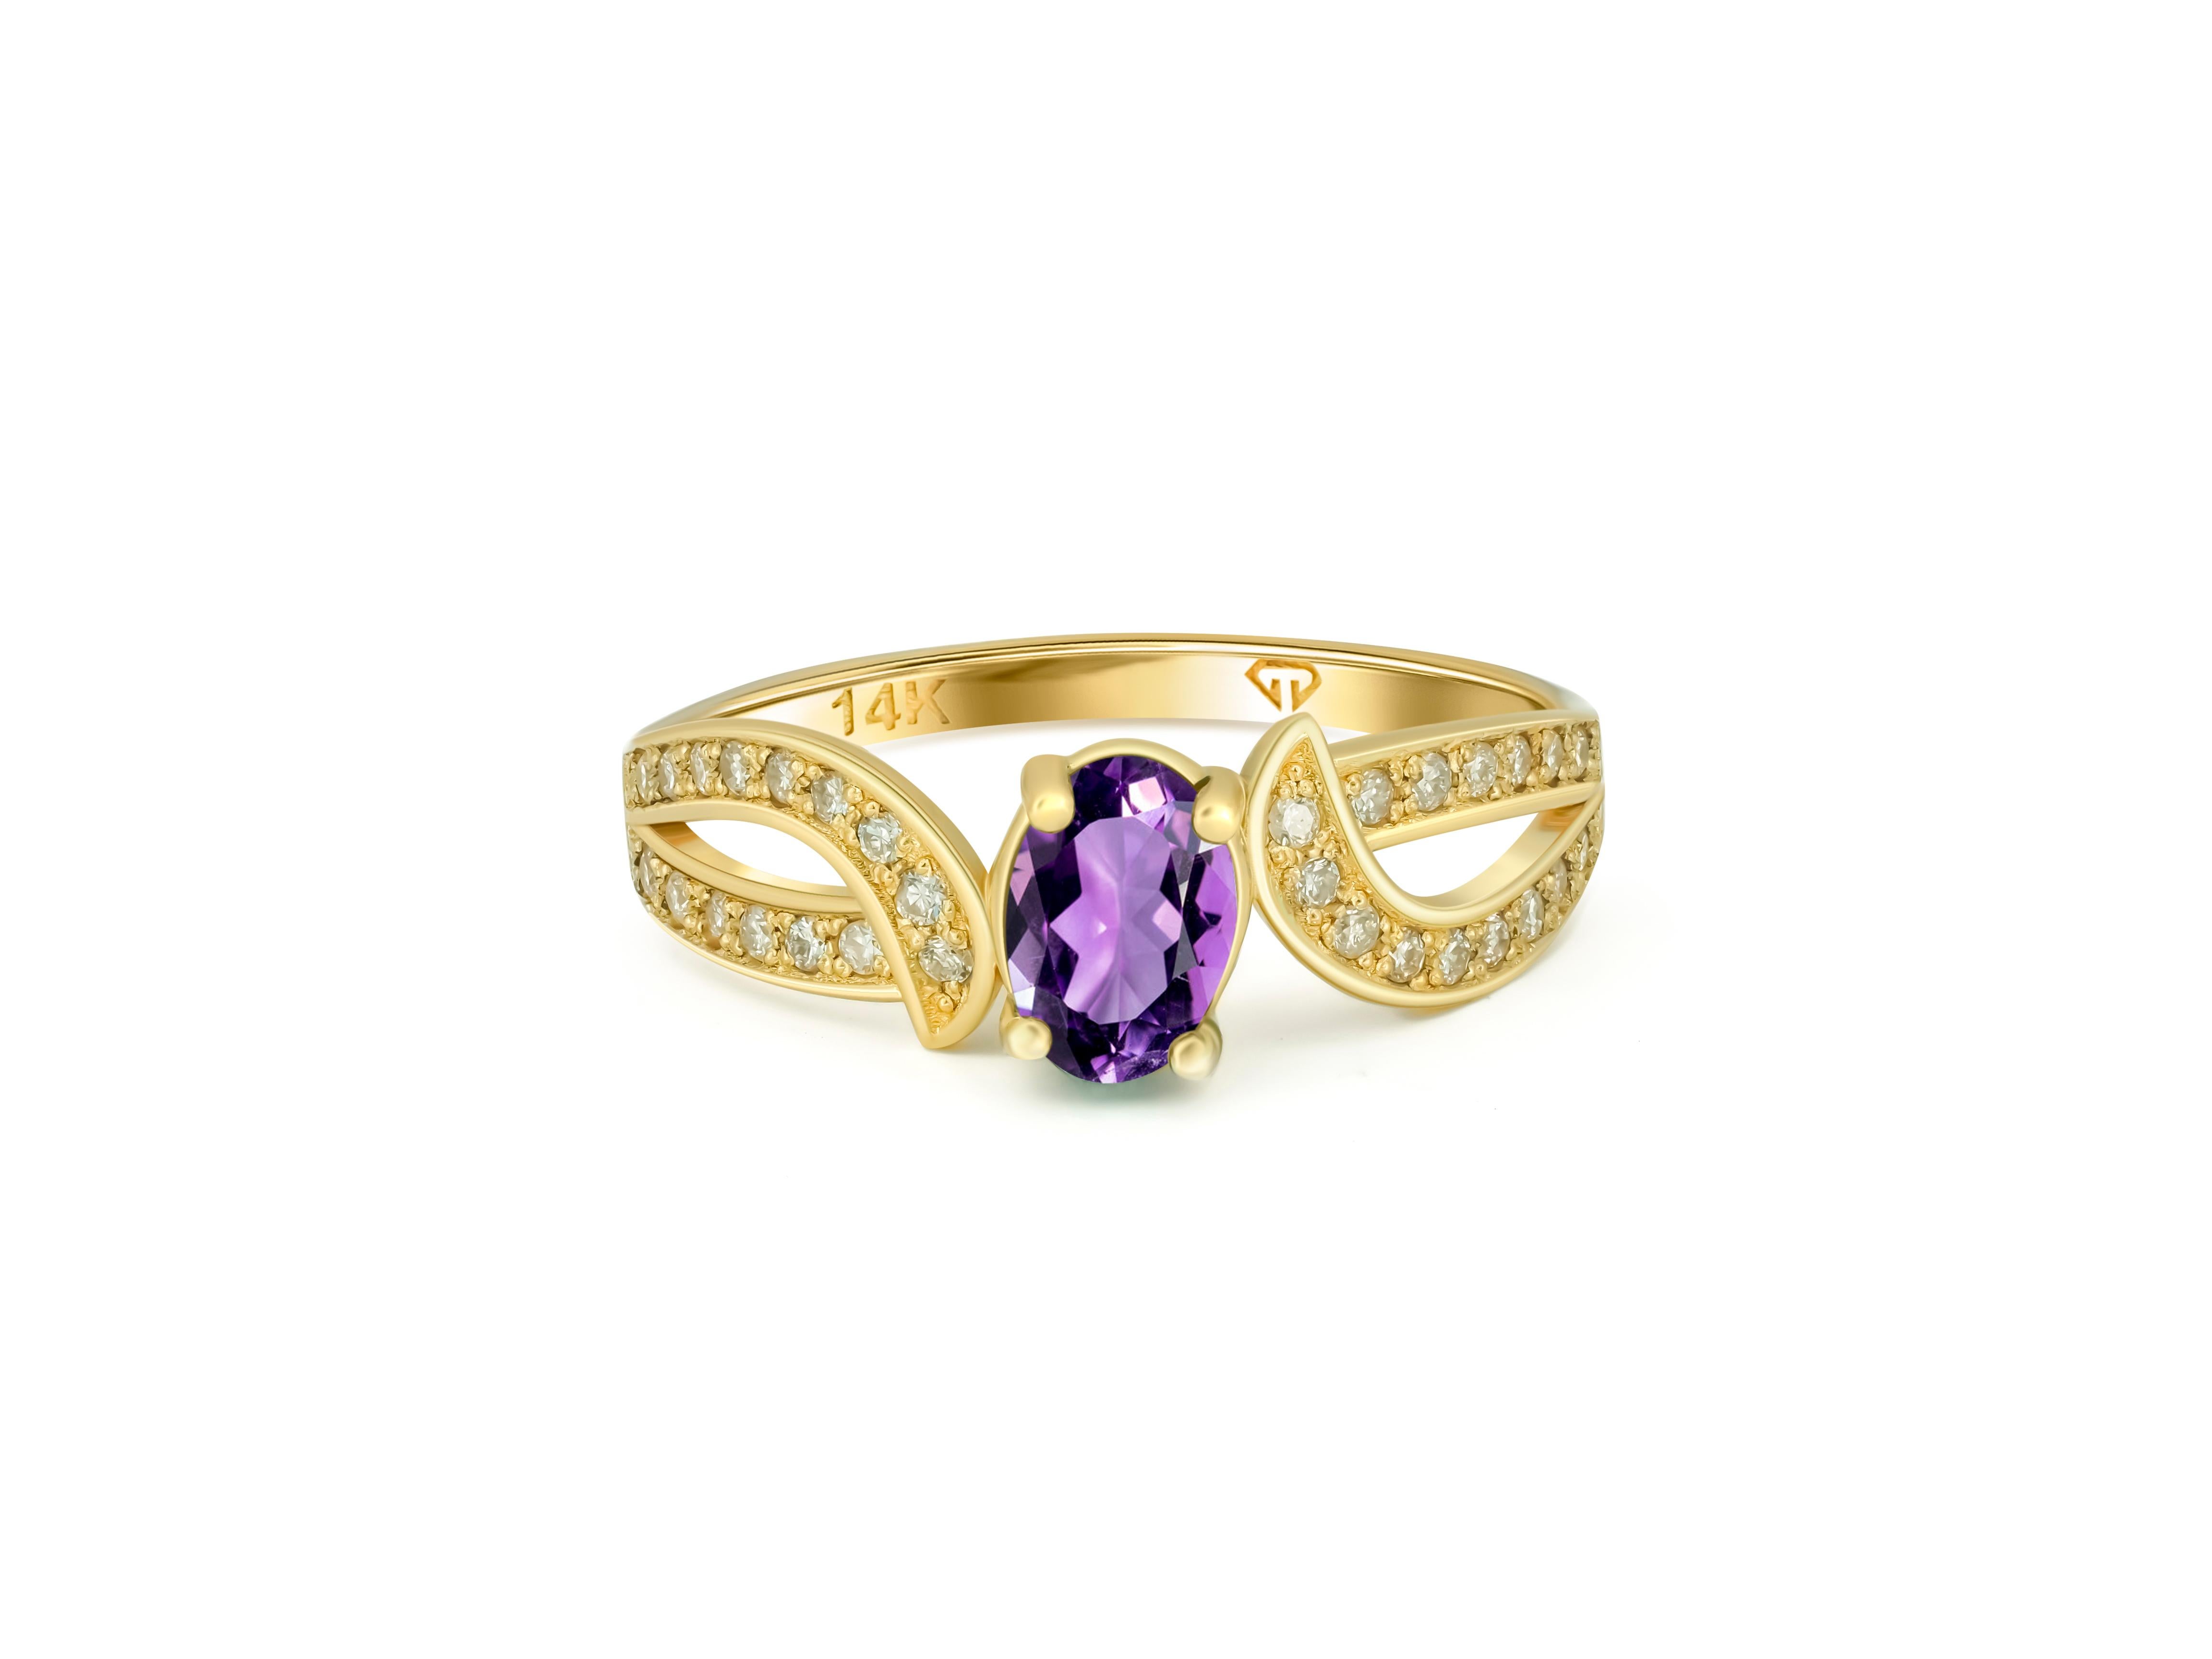 Amethyst 14k gold ring. 
Amethyst engagement ring. Amethyst vintage ring. Amethyst gold ring. February birthstone ring. Oval amethyst ring.

Metal: 14kt solid gold
Total weight: 2 gr. (depends from size)

Central gemstone: natural amethyst
Color: